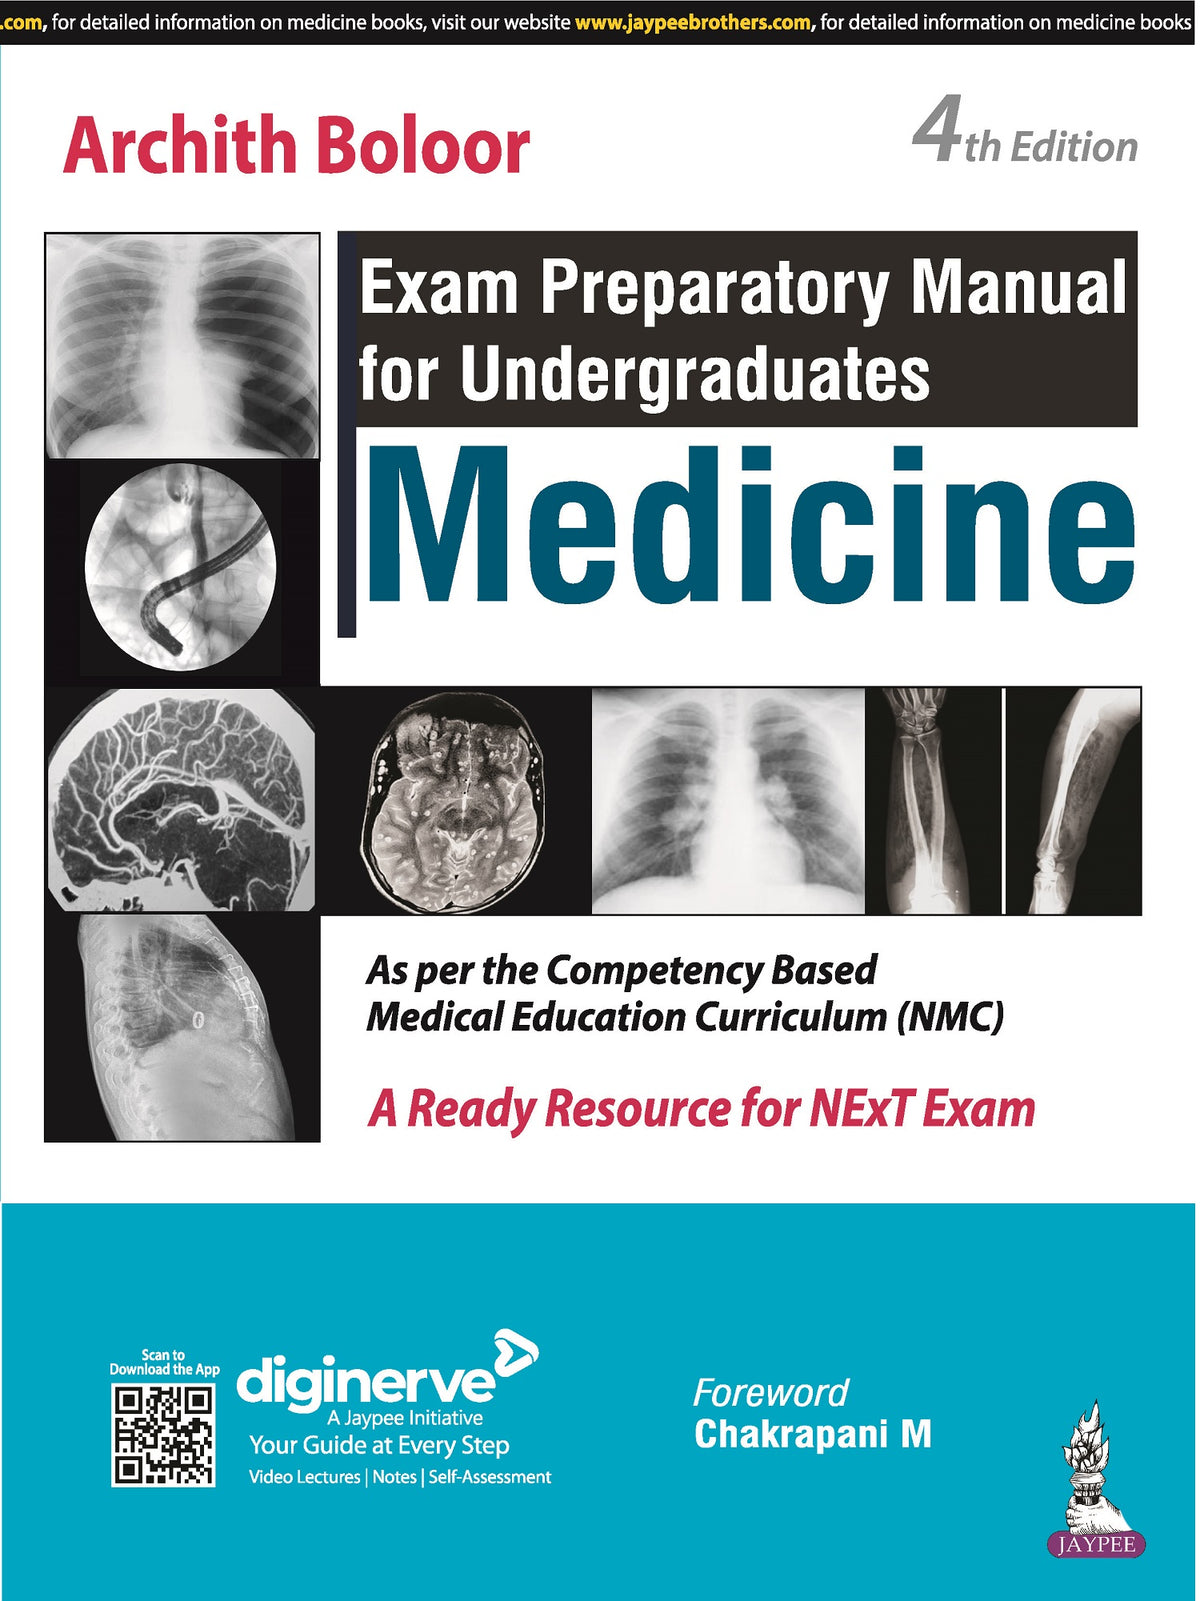 EXAM PREPARATORY MANUAL FOR UNDERGRADUATES MEDICINE, 4/E, ARCHITH BOLOOR,9789356963252

The Ultimate Exam Prep Companion"? It's your shortcut to success, focusing on high-yield content without overshadowing your trusted resources like Davidson's or Harrison's.

📚 Comprehensive MBBS Exam Prep Manual for Undergraduates
- Covers key topics like AETCOM, Pain and Palliative Care
- Includes numerous algorithmic flowcharts and line diagrams
- Features high-yield areas for top exams like NEET, NEXT and MRCP